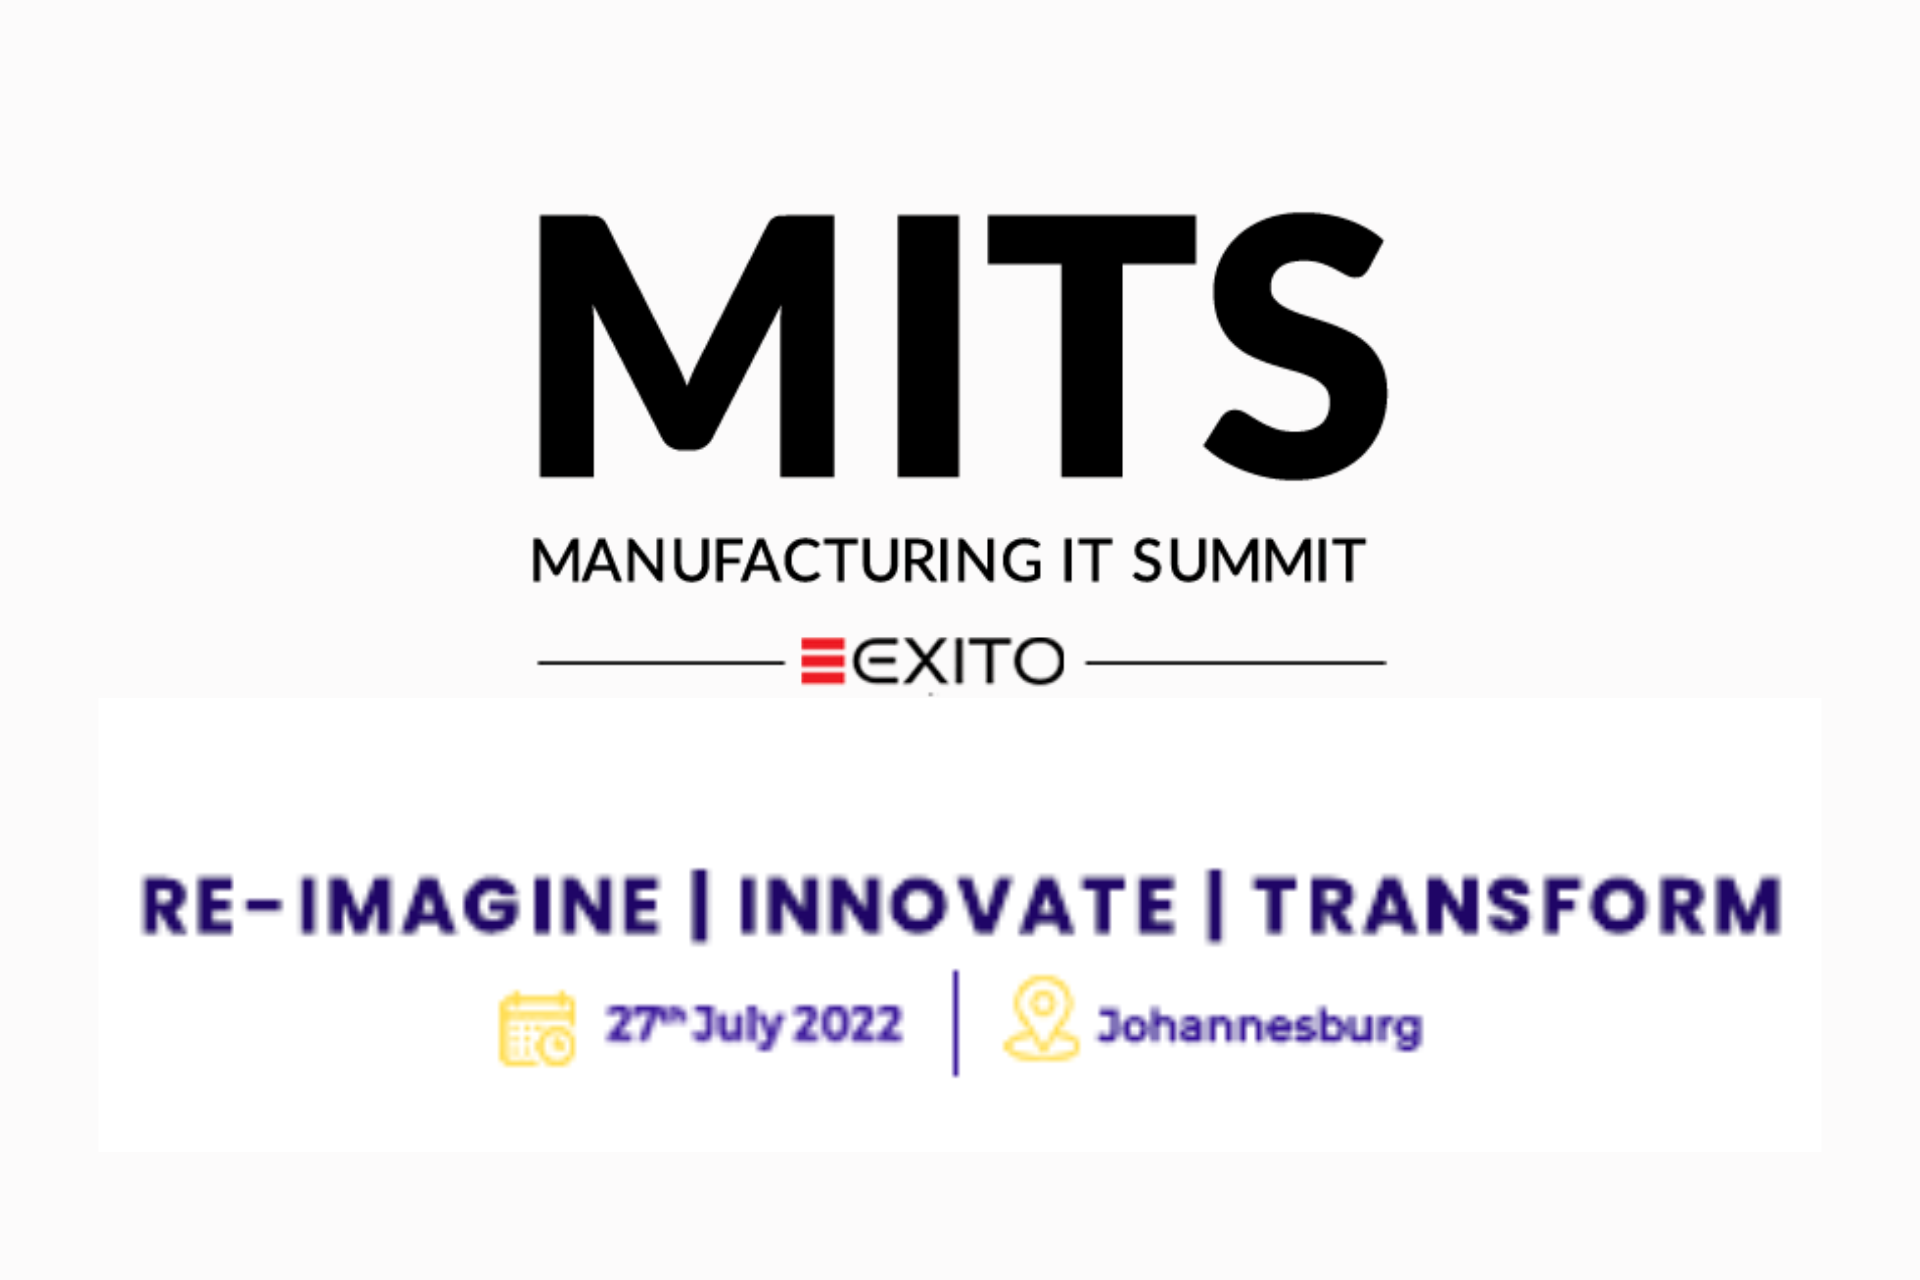 20th Edition of MITS South Africa Physical Conference on 27th July 2022